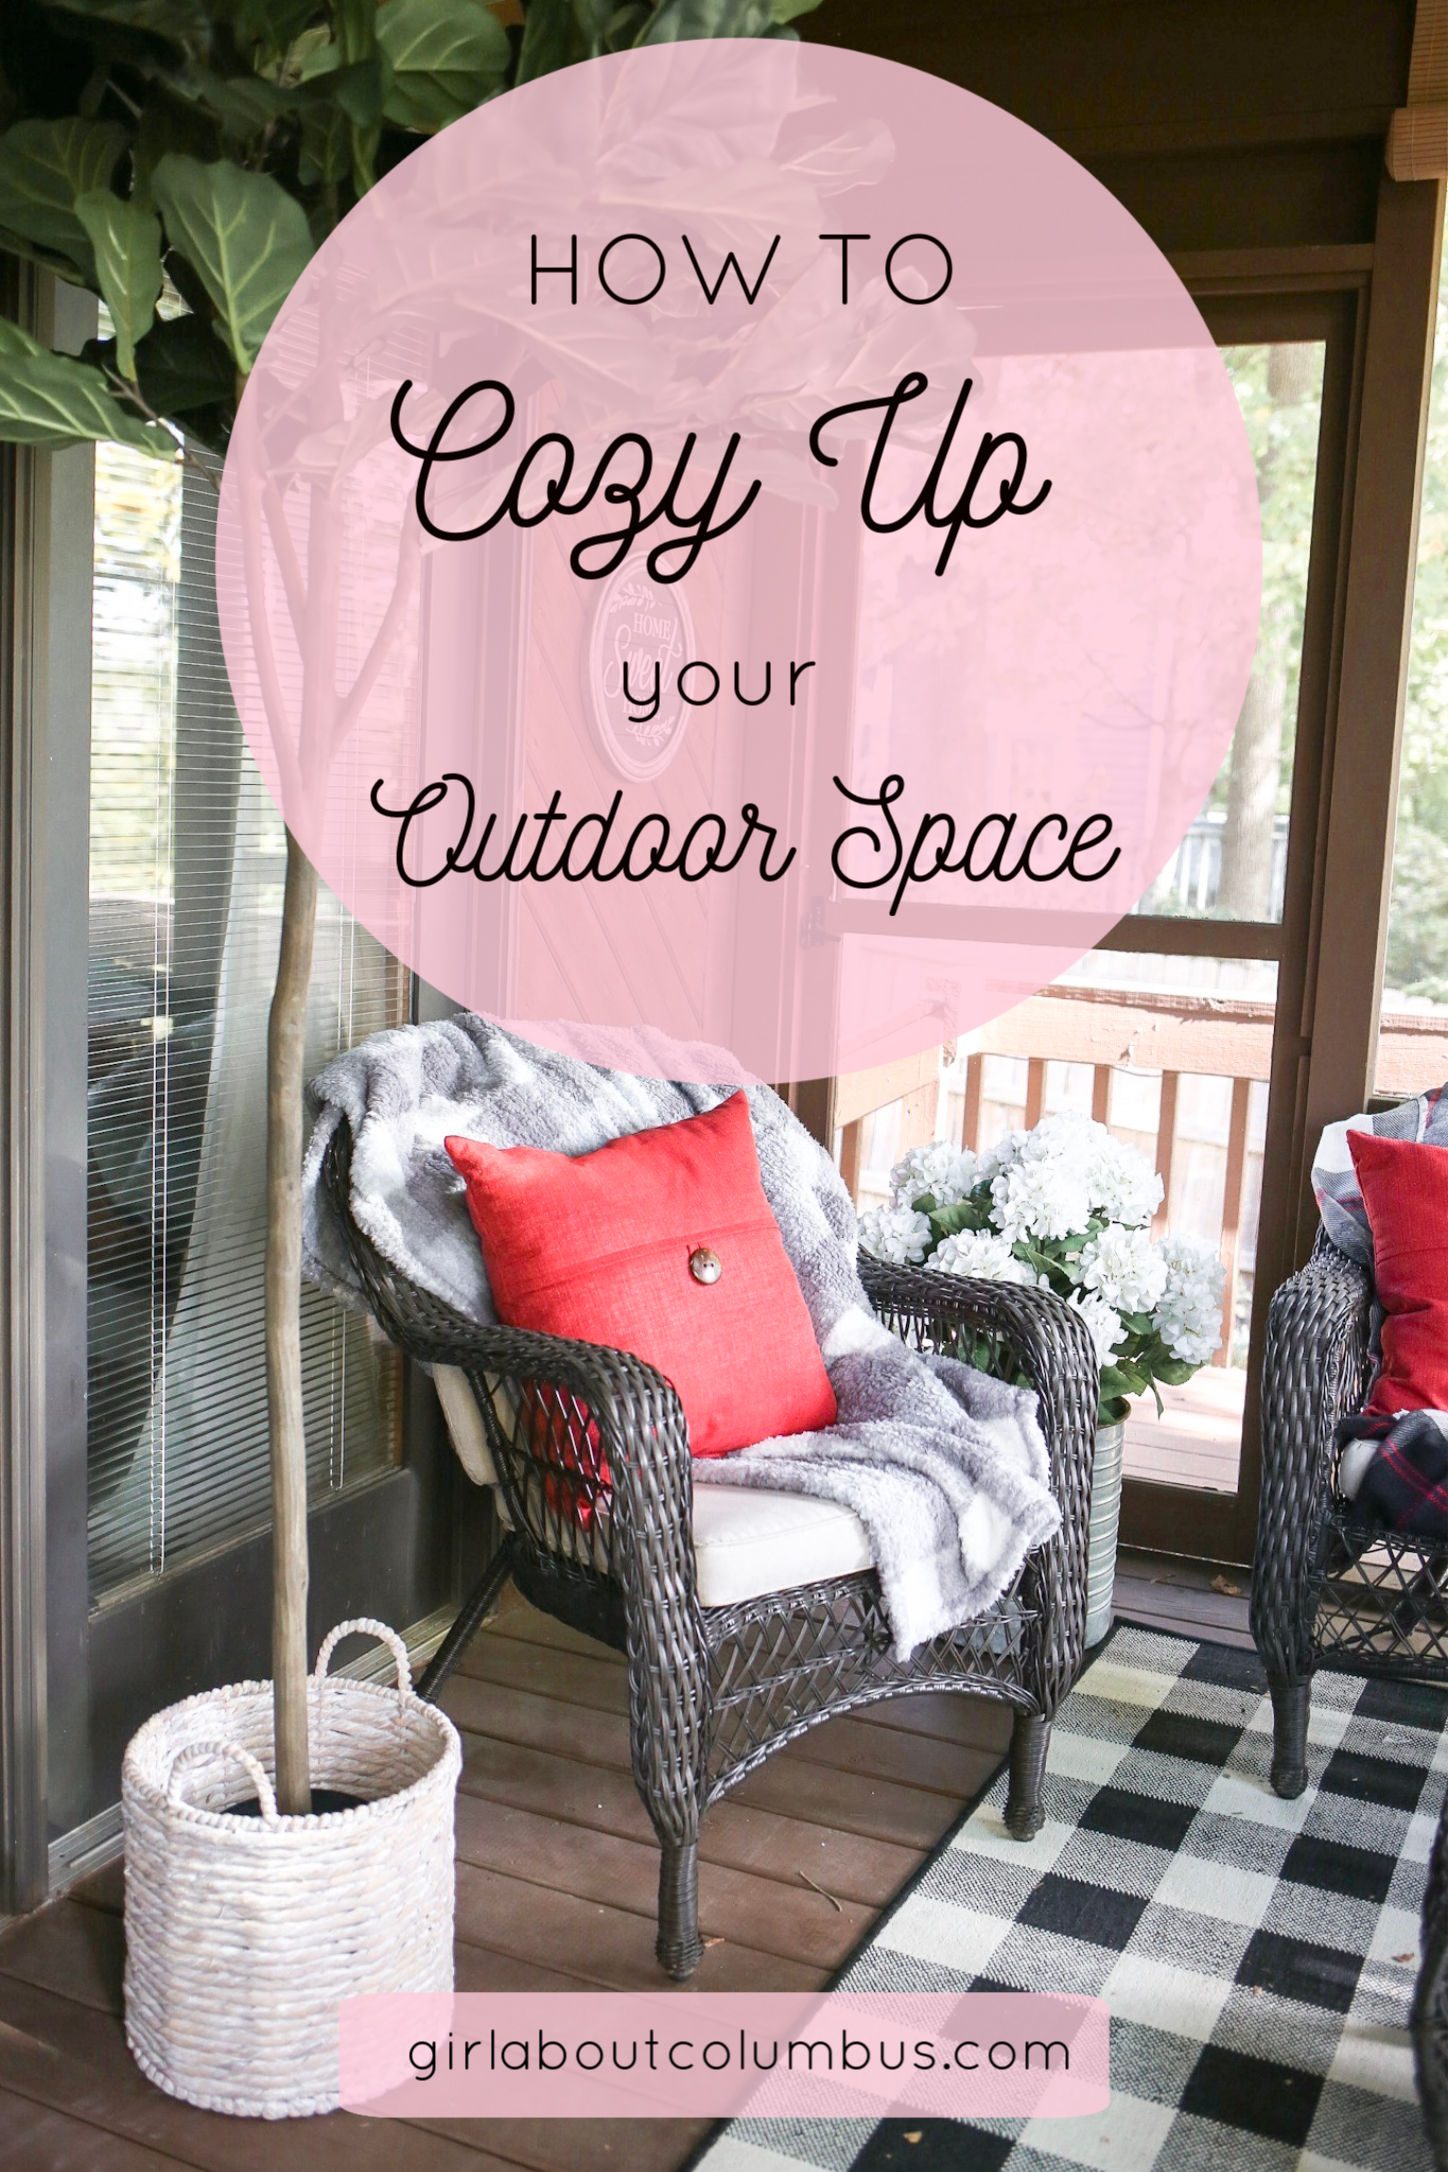 How to Make Your Outdoor Space Cozy this Fall